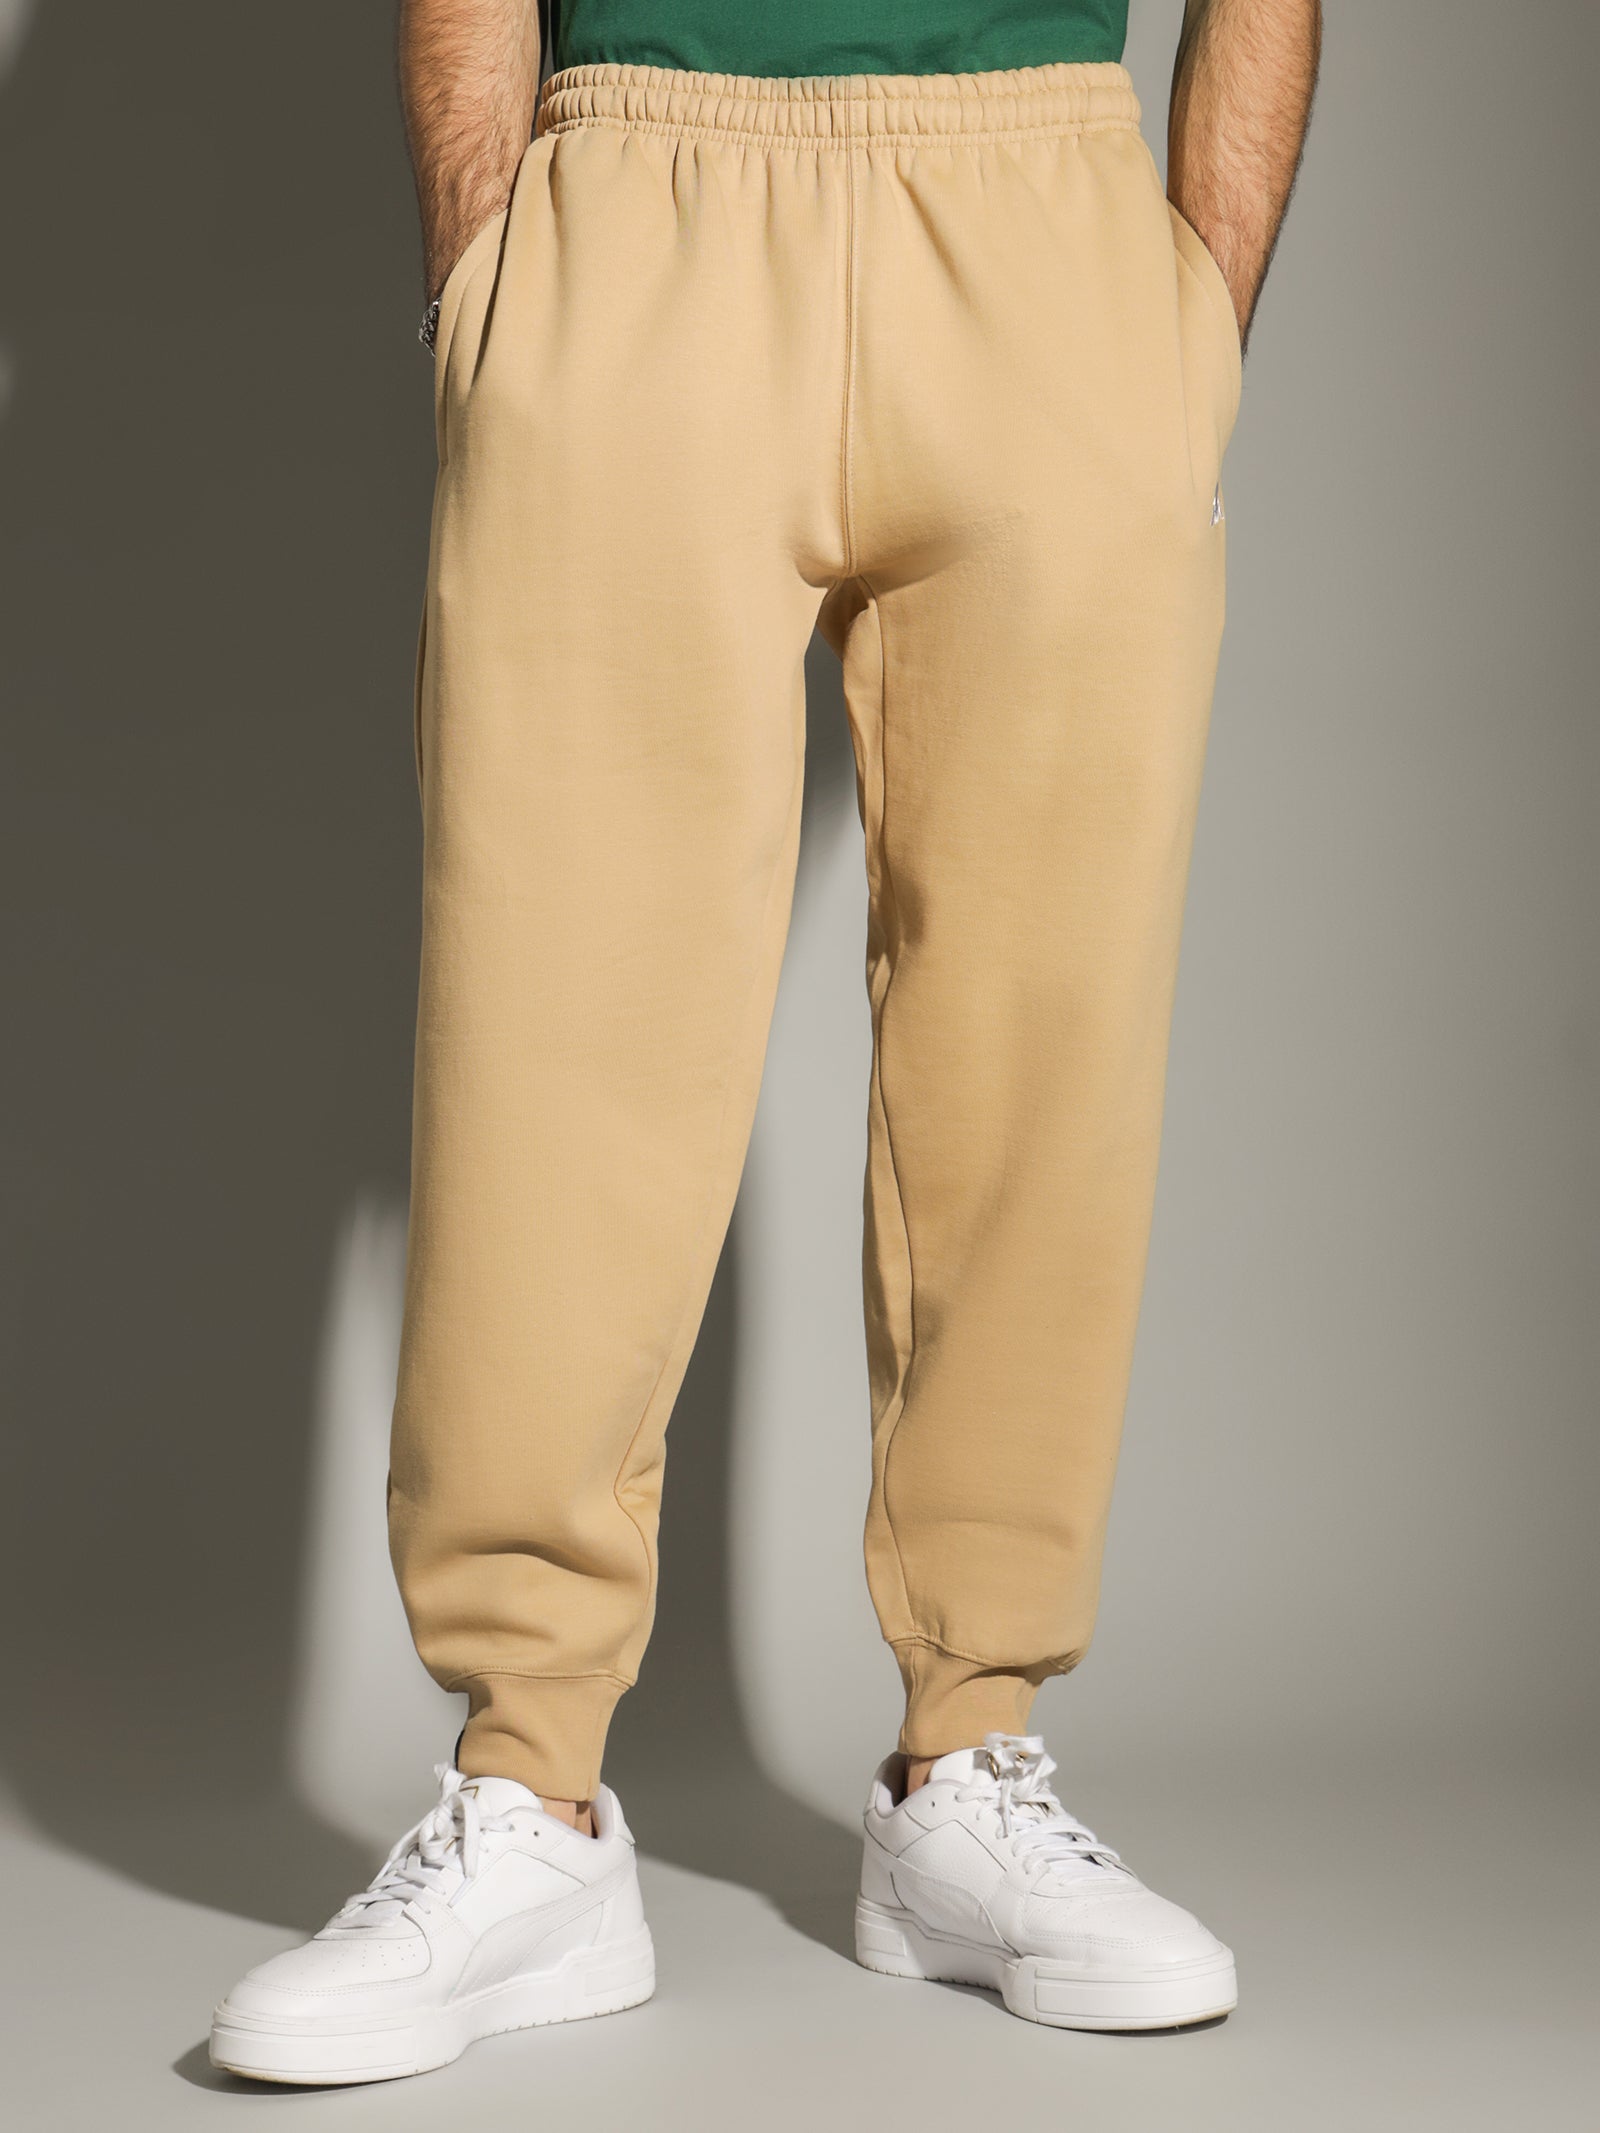 Authentic Scar Track Pants in Beige - Glue Store